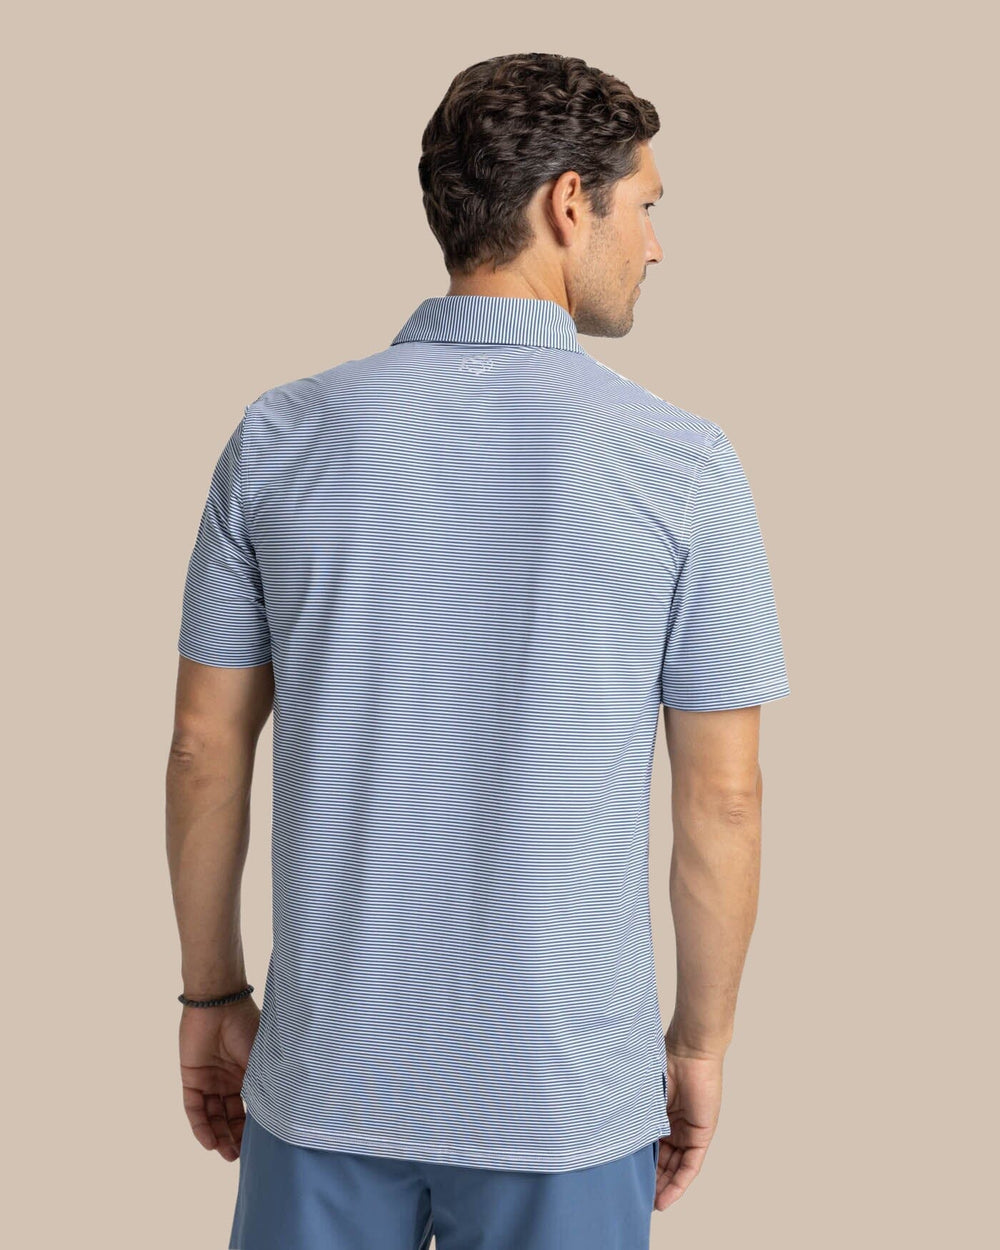 The back view of the Southern Tide brrr-eeze Meadowbrook Stripe Polo by Southern Tide - Aged Denim